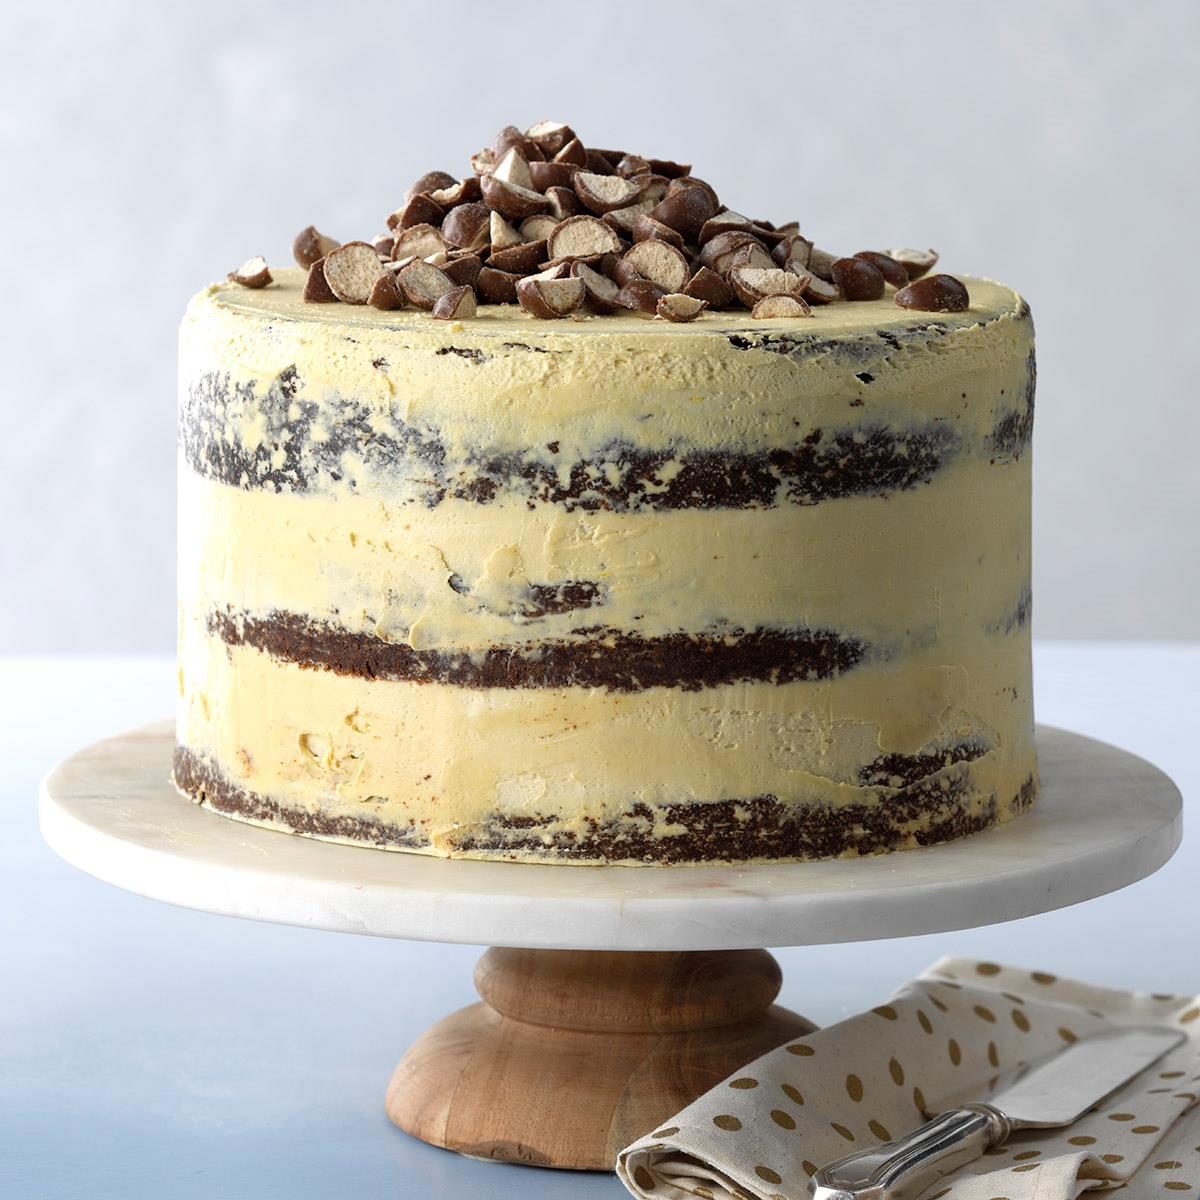 https://www.tasteofhome.com/wp-content/uploads/2018/01/Malted-Chocolate-Stout-Layer-Cake_EXPS_THCA19_110952_C02_23_5b-6.jpg